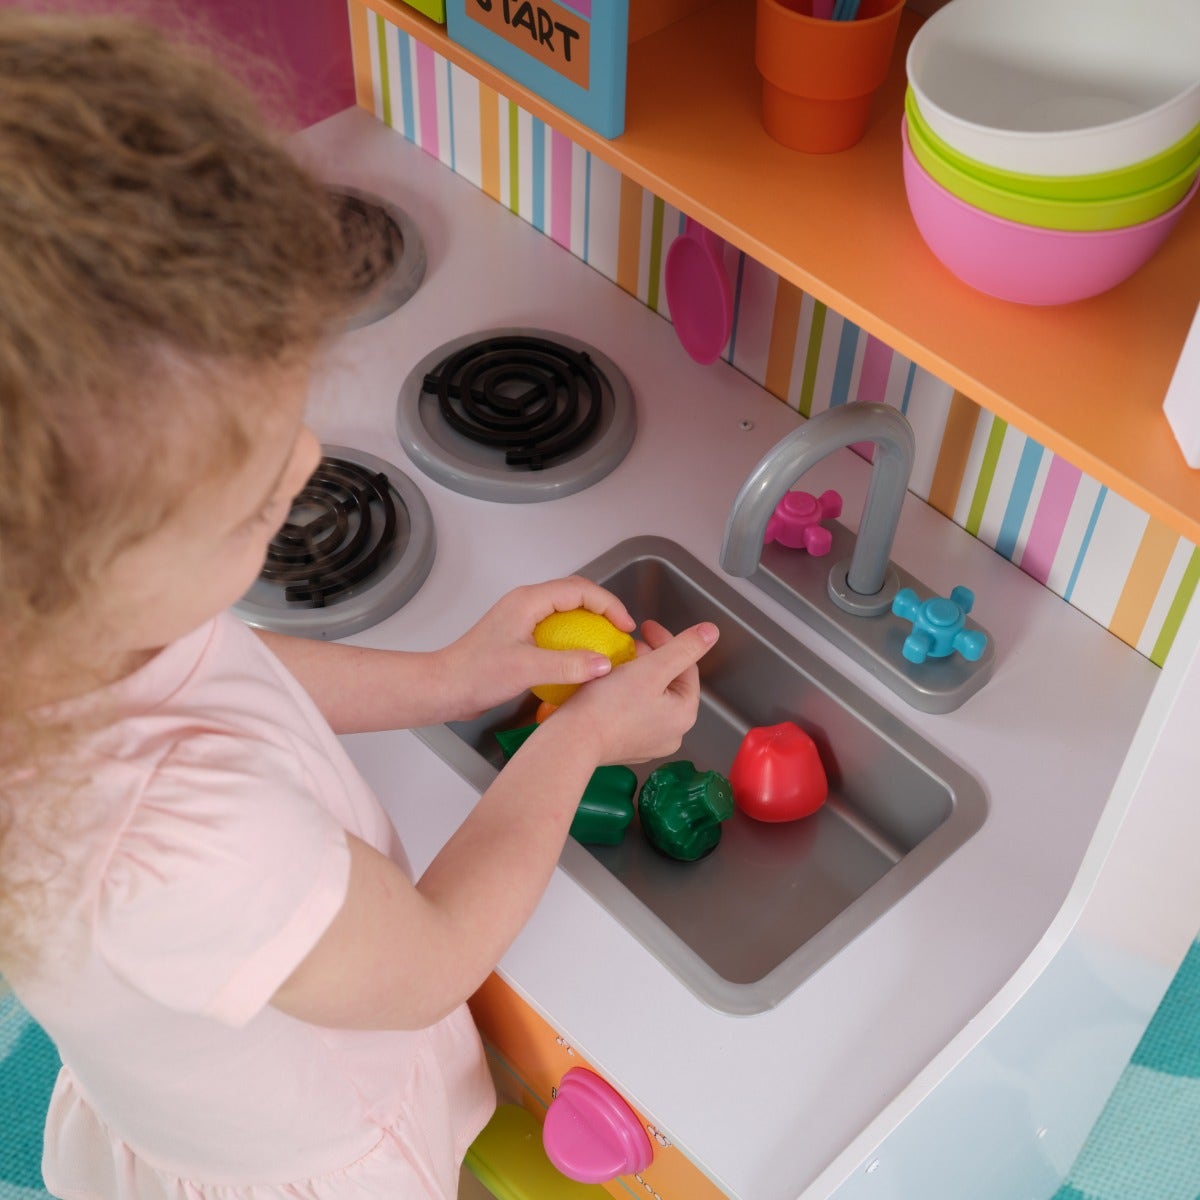 Wash Dishes: Let them load the oven with food and the sink with plates for hours of play cooking fun. Sink removes for easy cleaning.